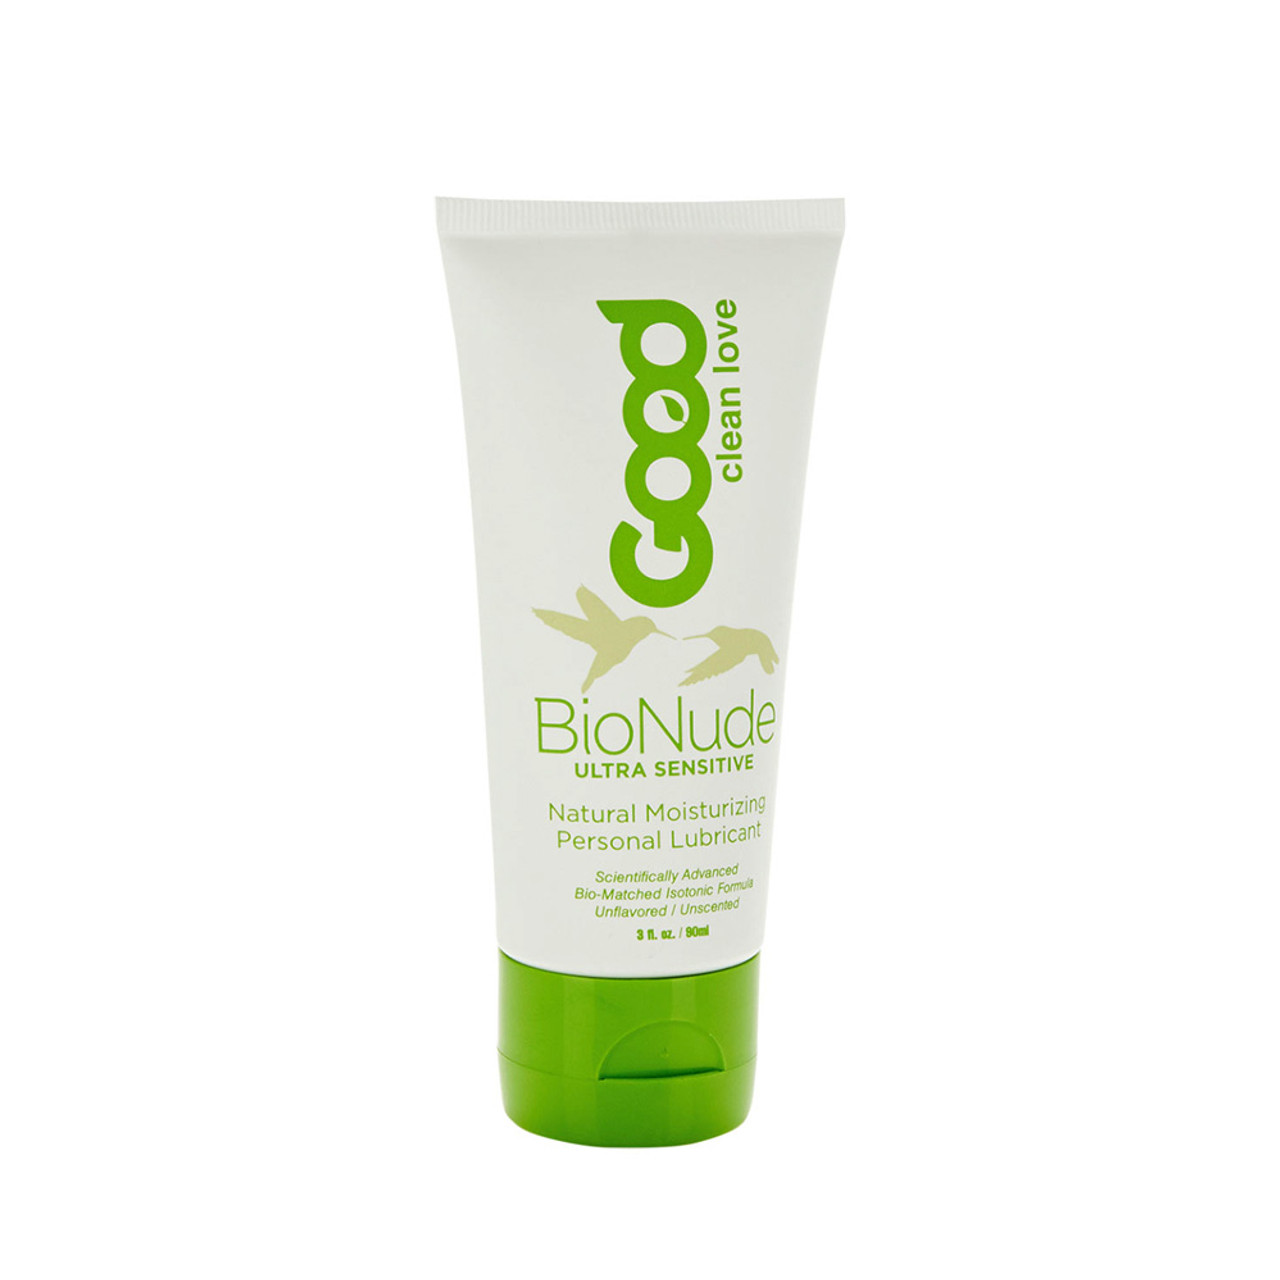 Good Clean Love Almost Naked Personal Lube - 1.5 oz tube